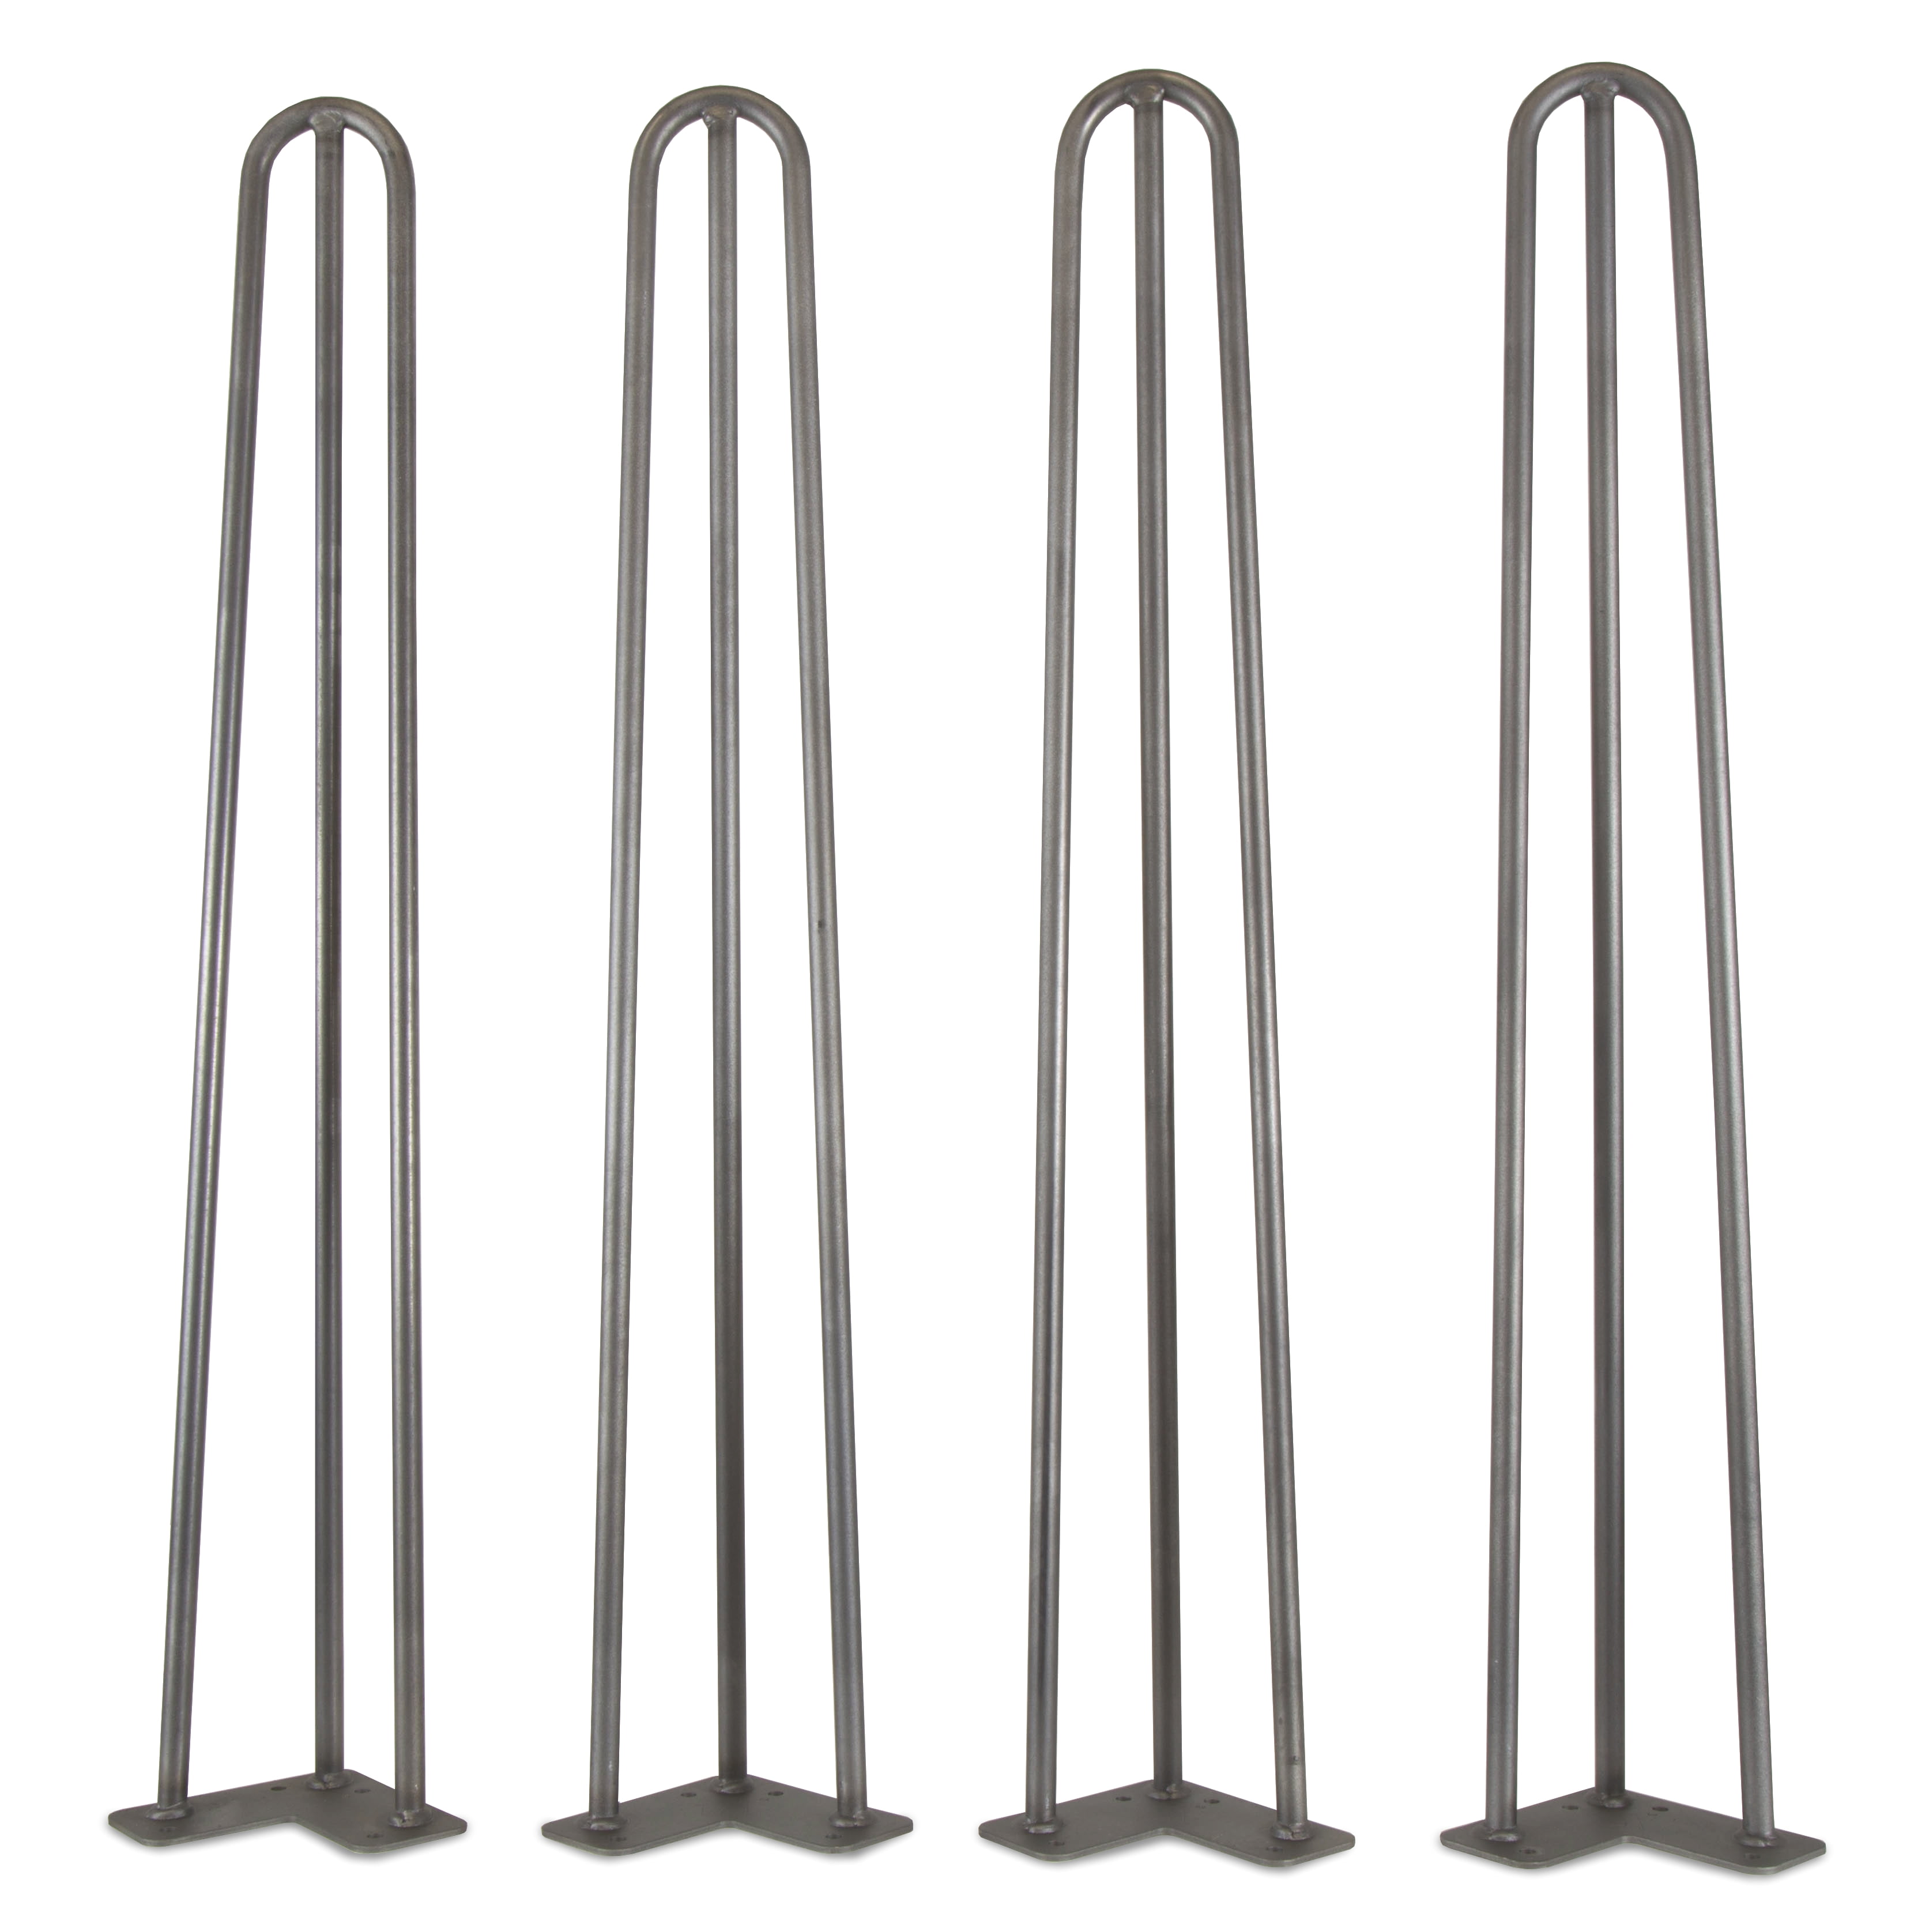 Details about   4Pack Hairpin Table Legs Heavy Duty Black Iron Metal Rods Industrial Style 8-30" 